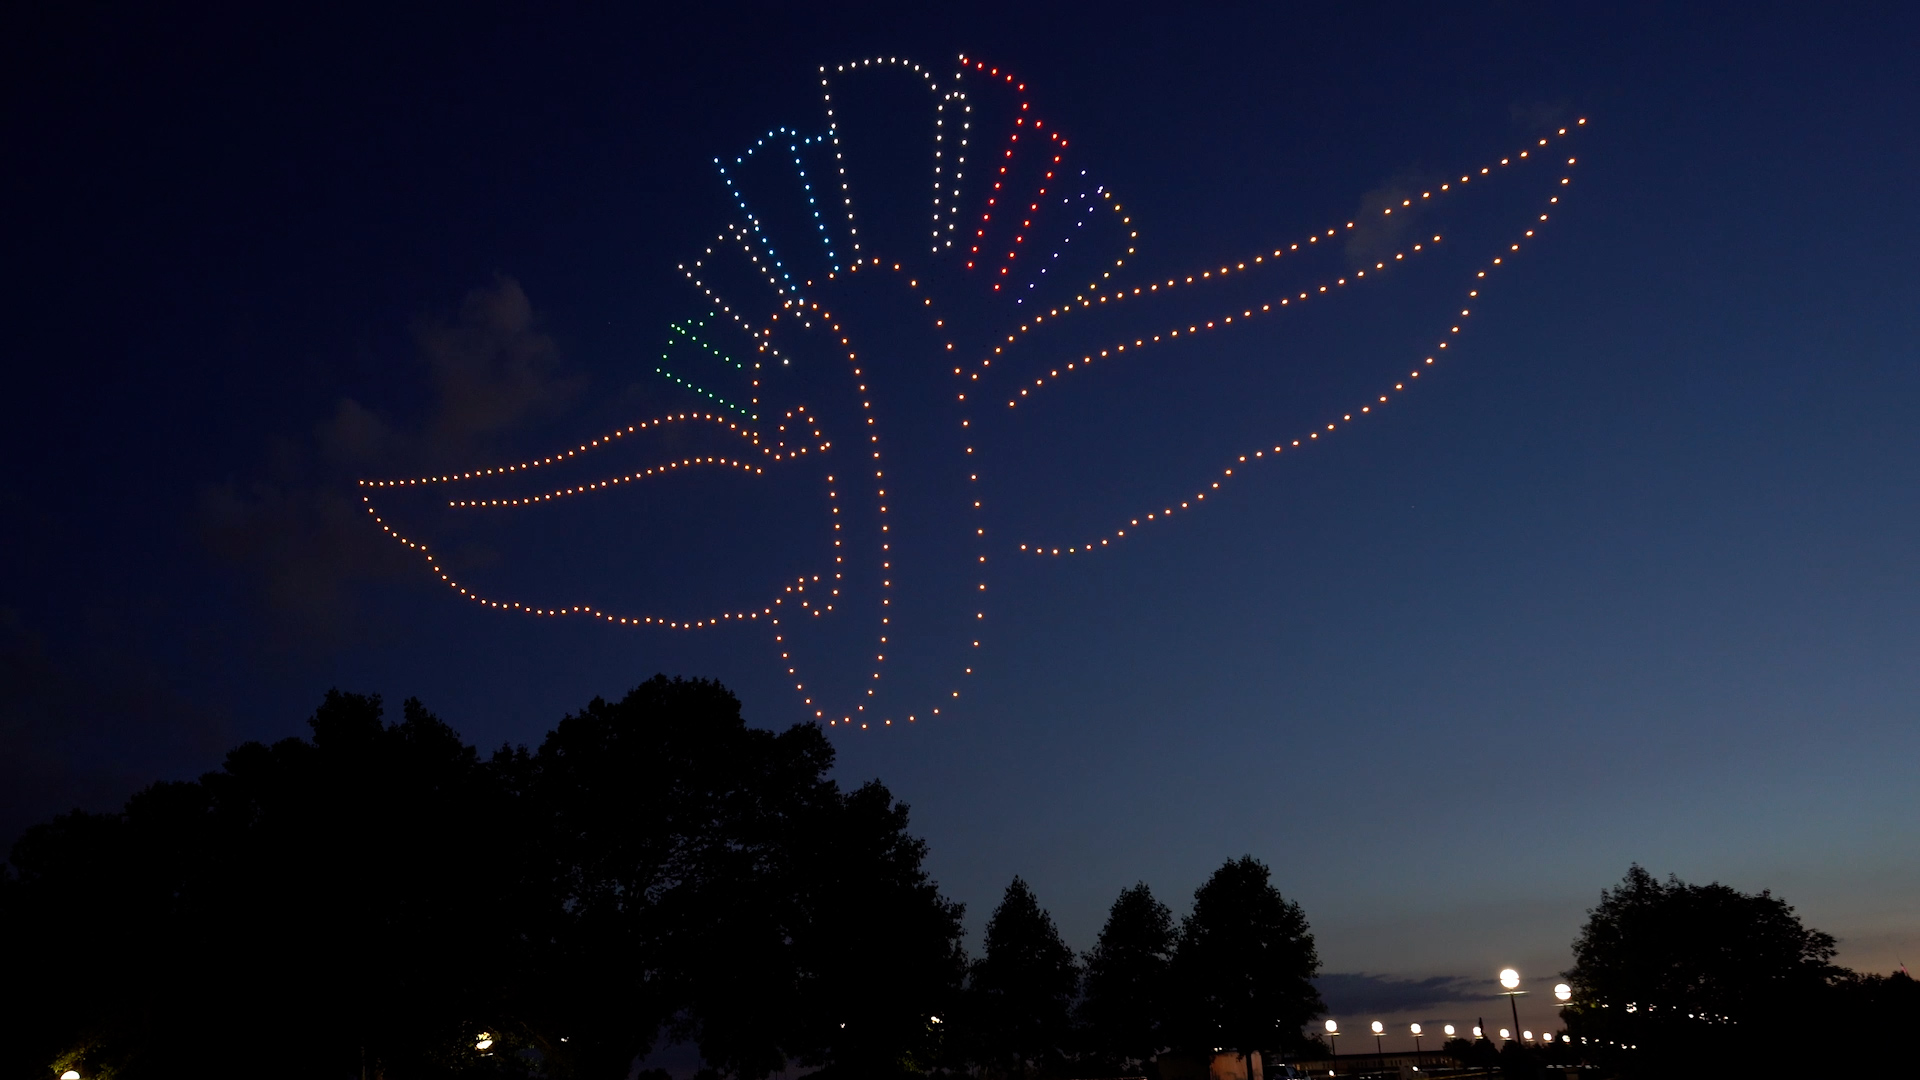 Check Out Indy 500’s First-Ever Drone Show! [VIDEO]